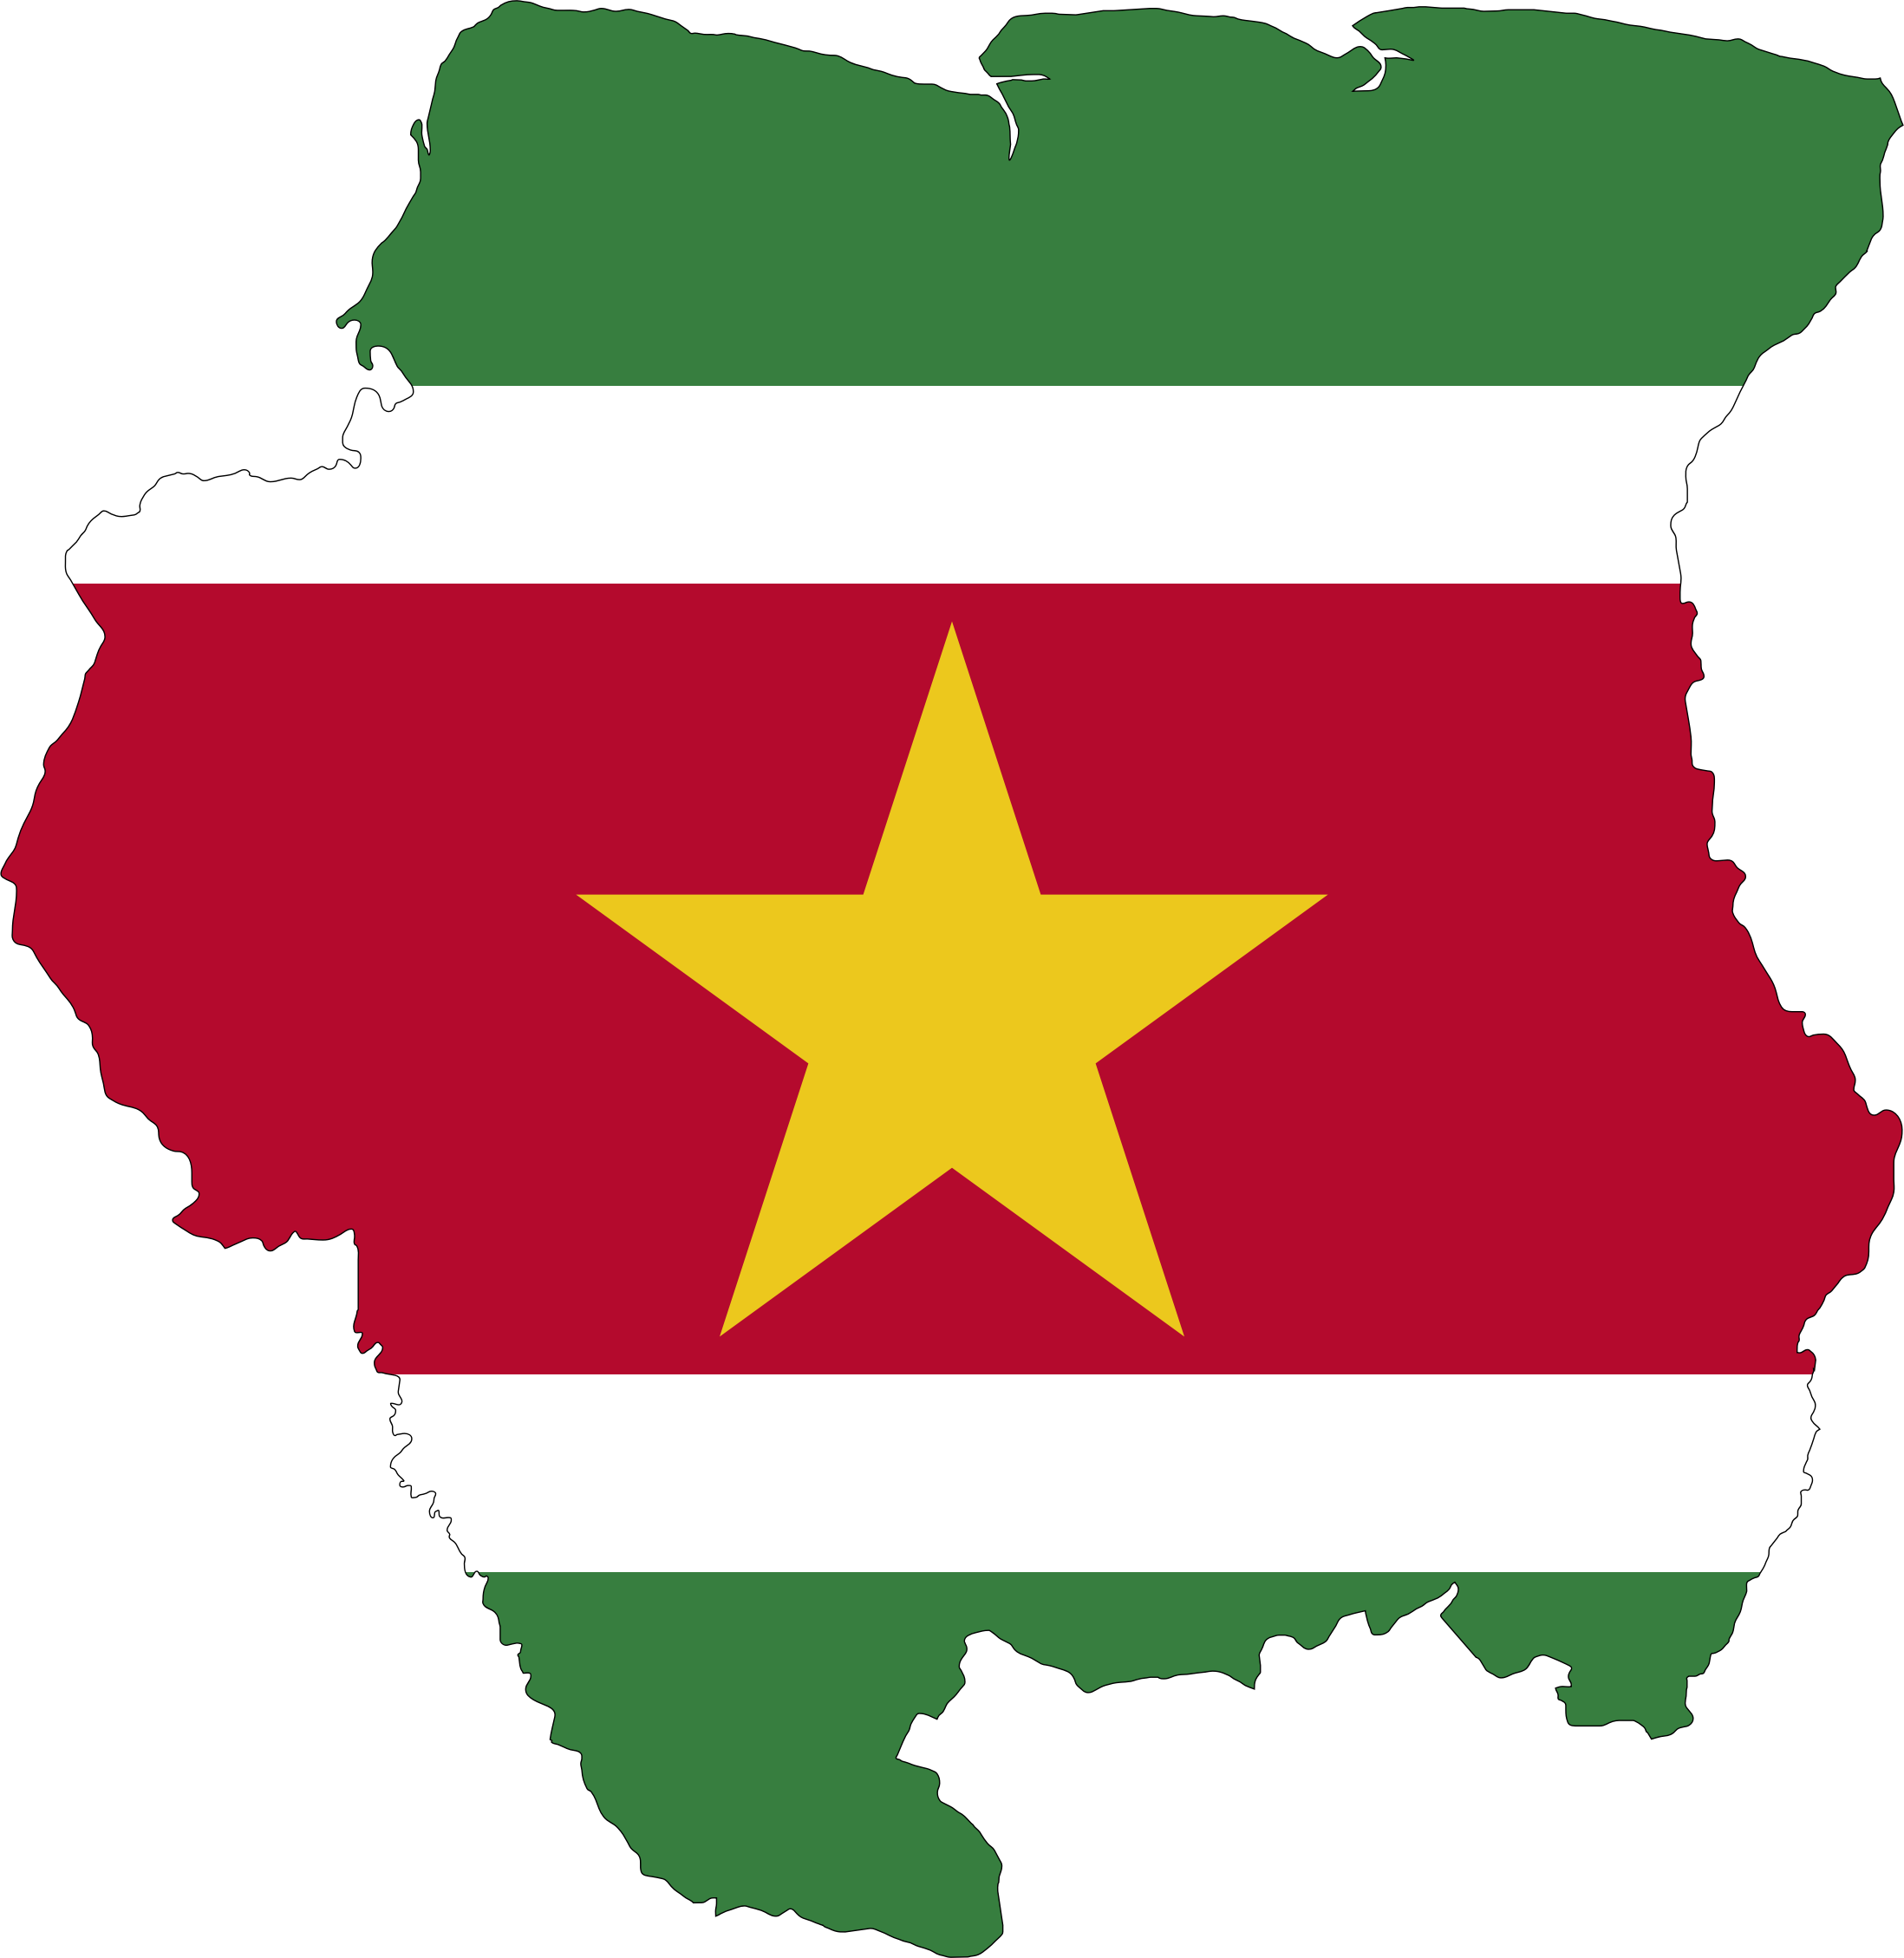 This Free Icons Png Design Of Suriname Map Flag - Suriname Flag And Country (2196x2258)